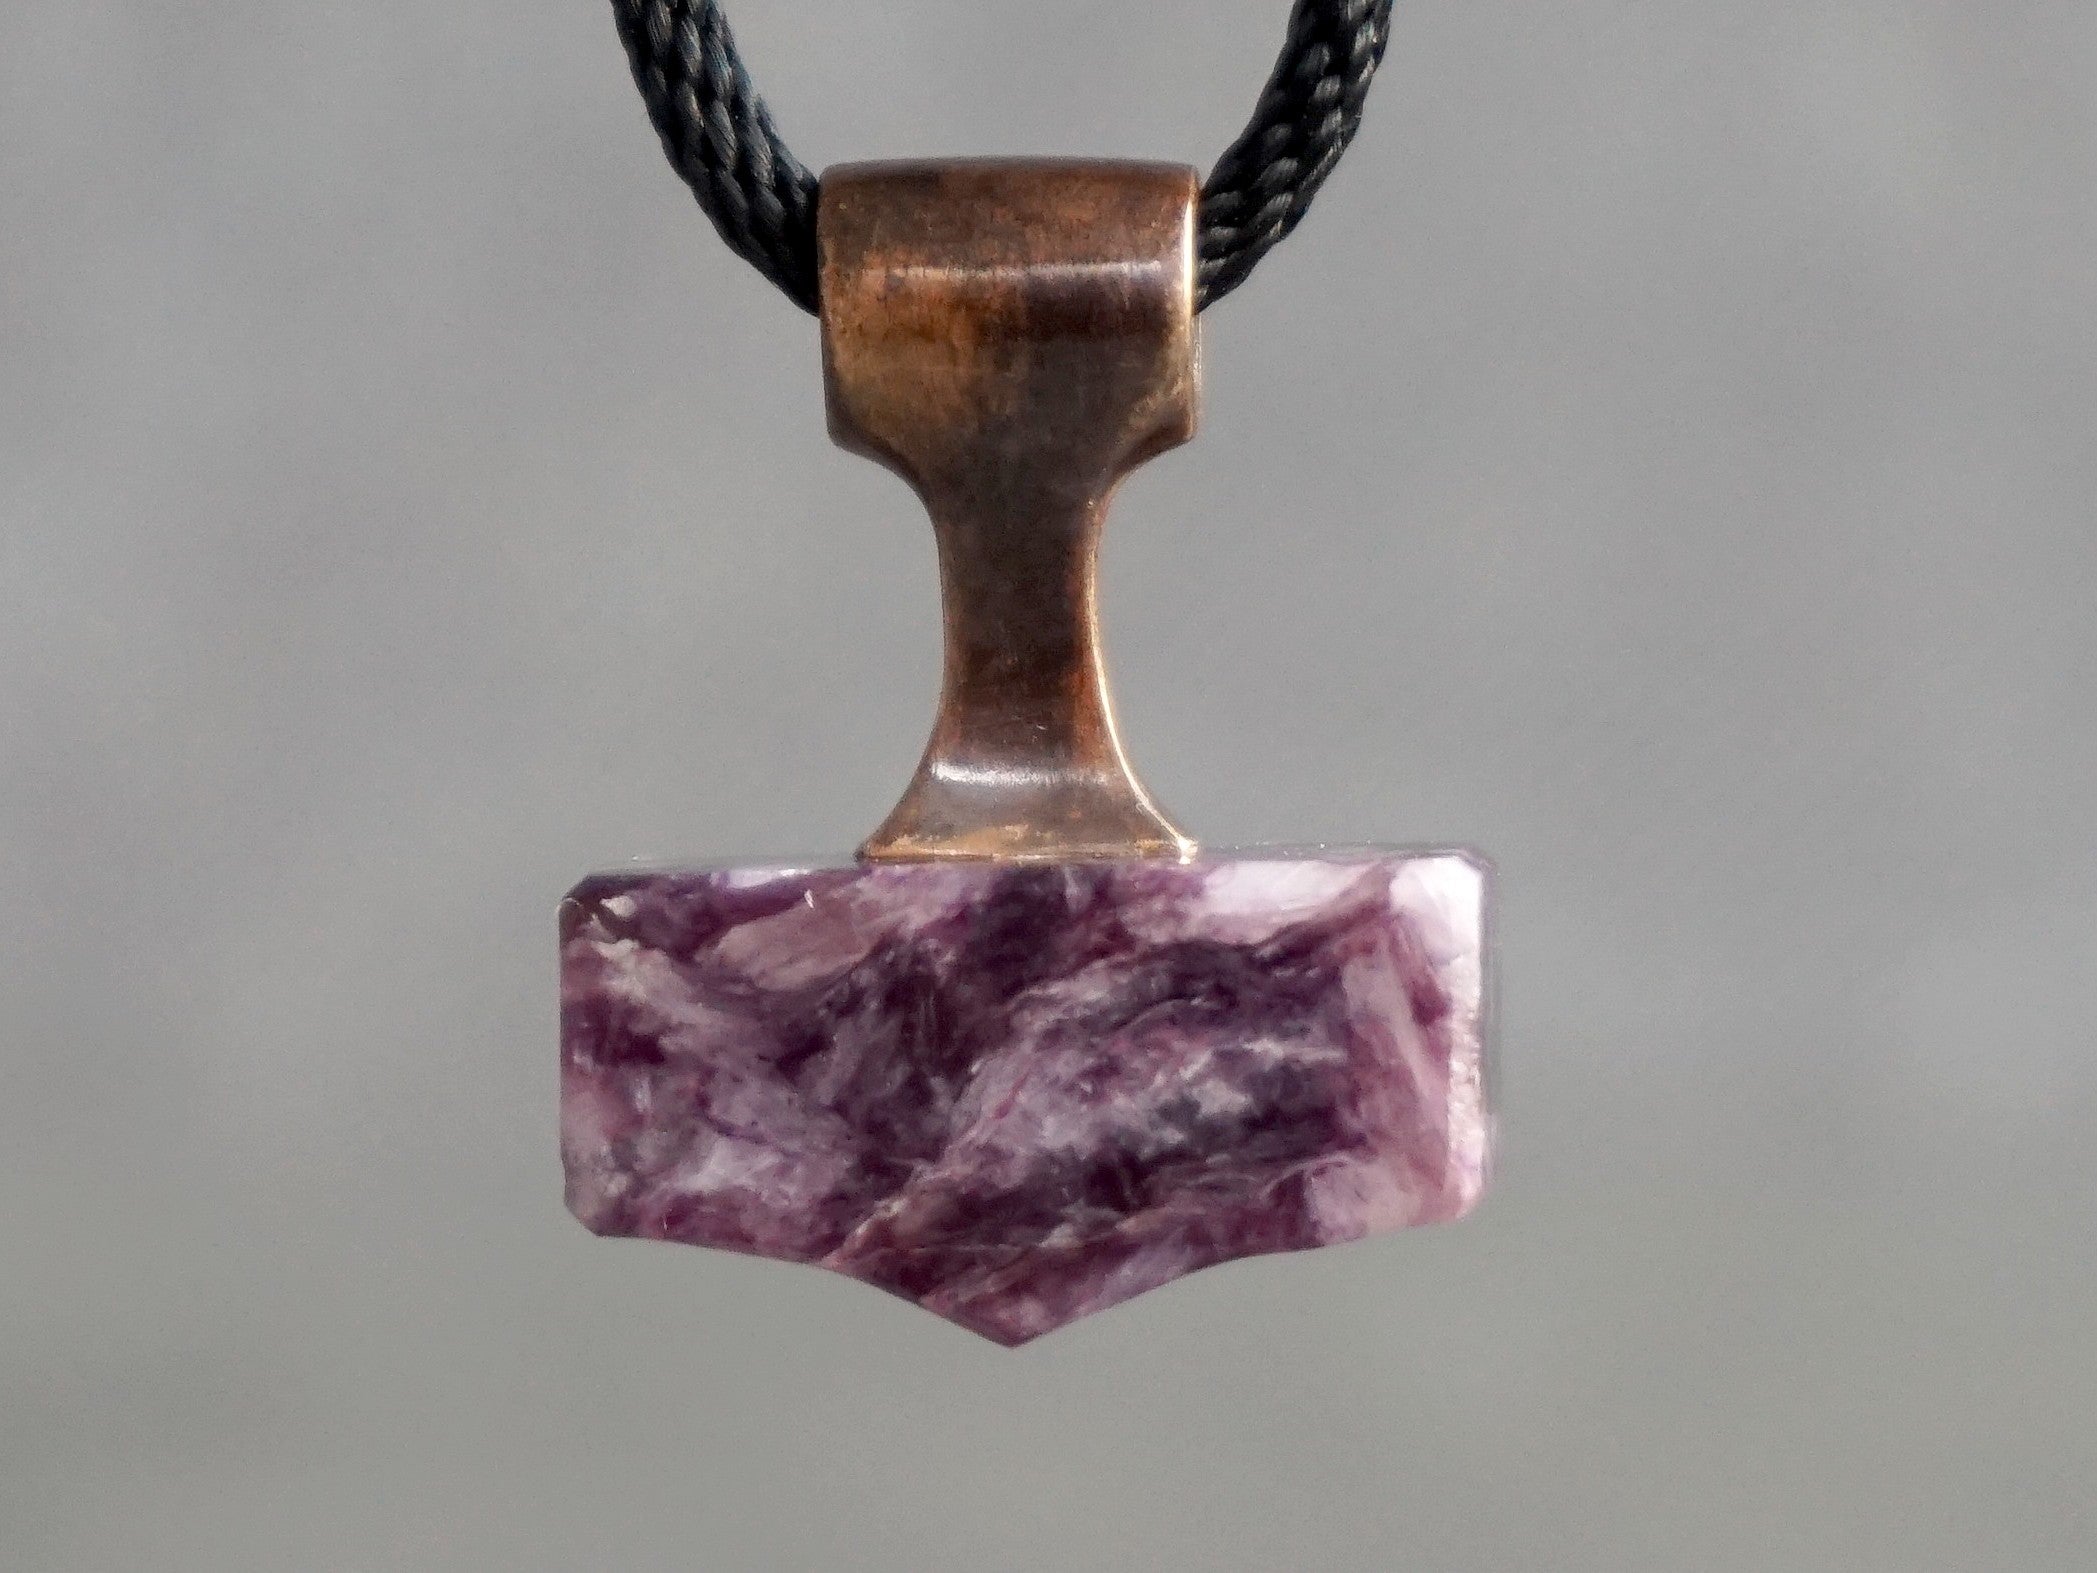 small hammer amulet made of bronze and purple stone with wavelike pattern